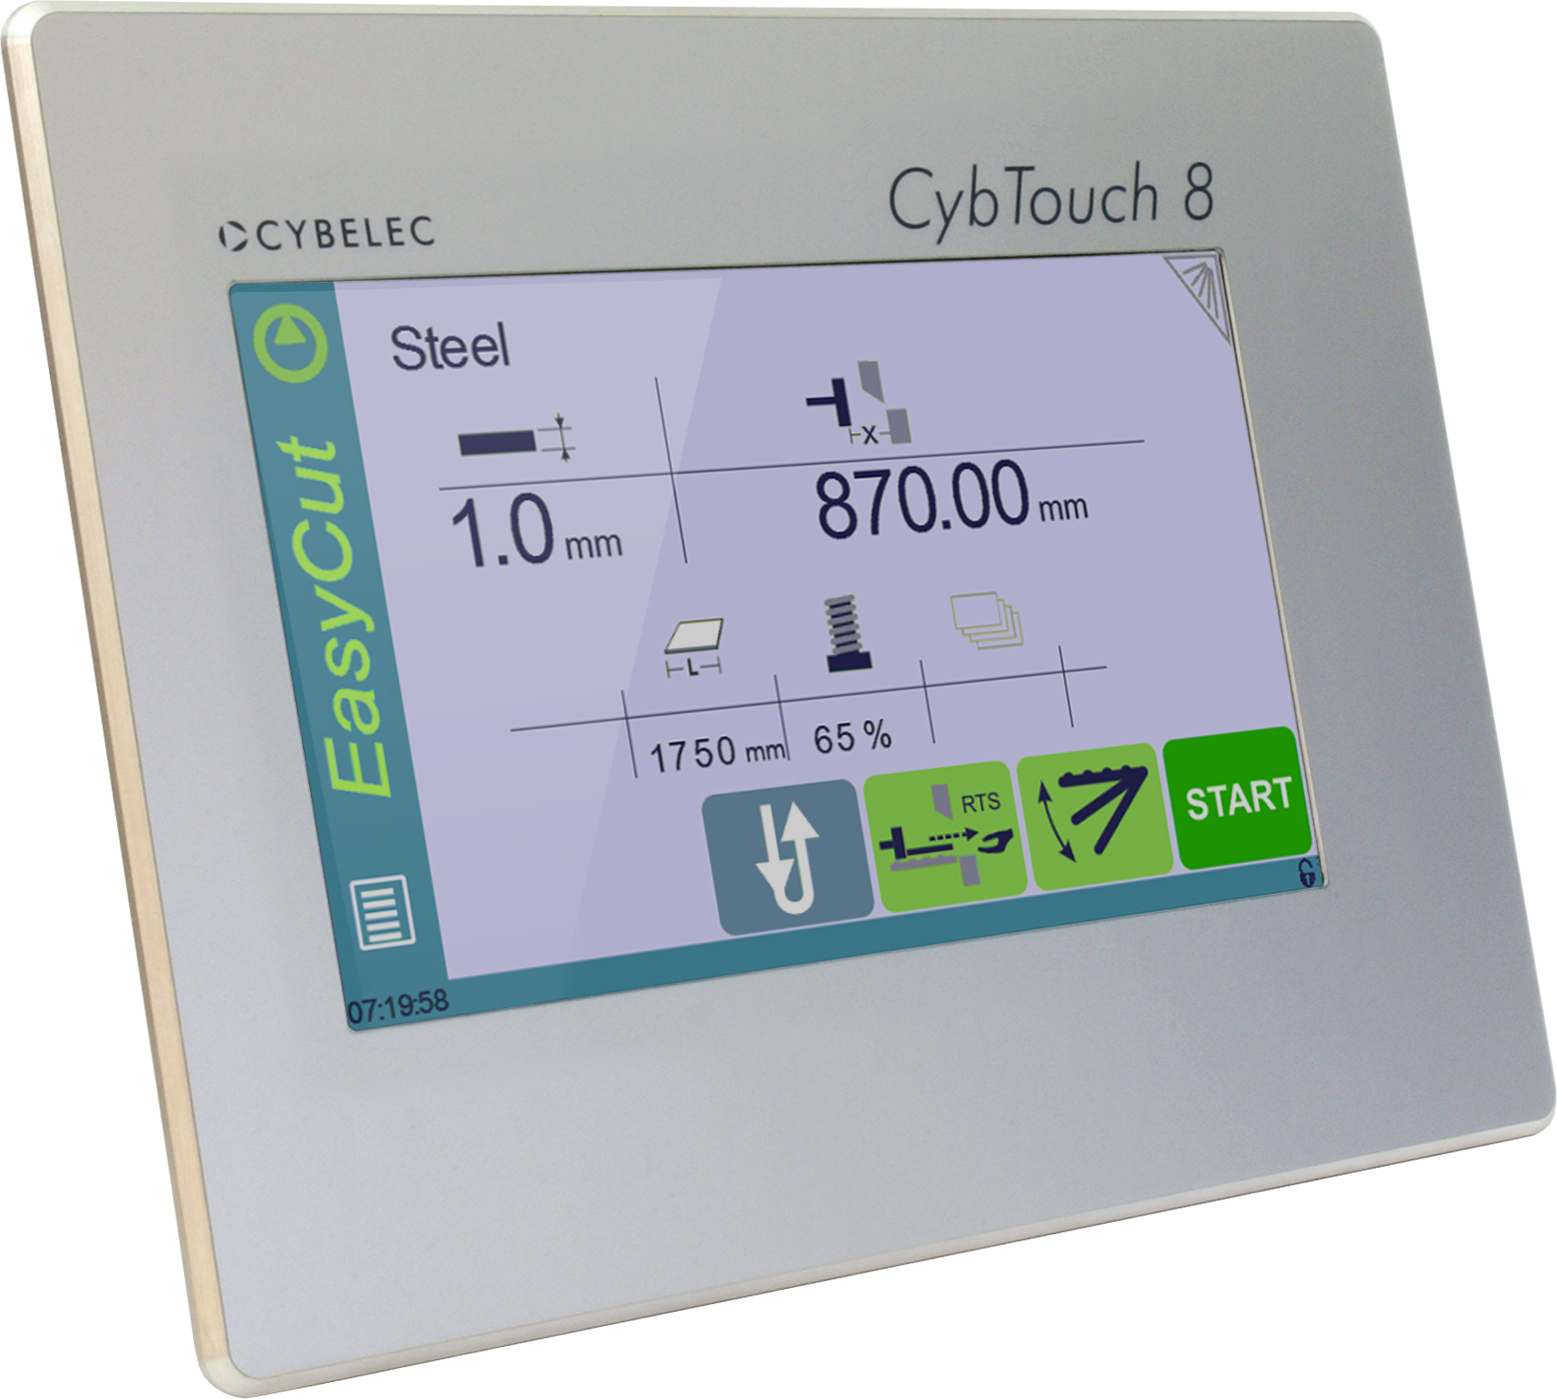 Cybelec CybTouch 8 G Computer Numerical Controllers | AMI - Automated Machinery, Inc.